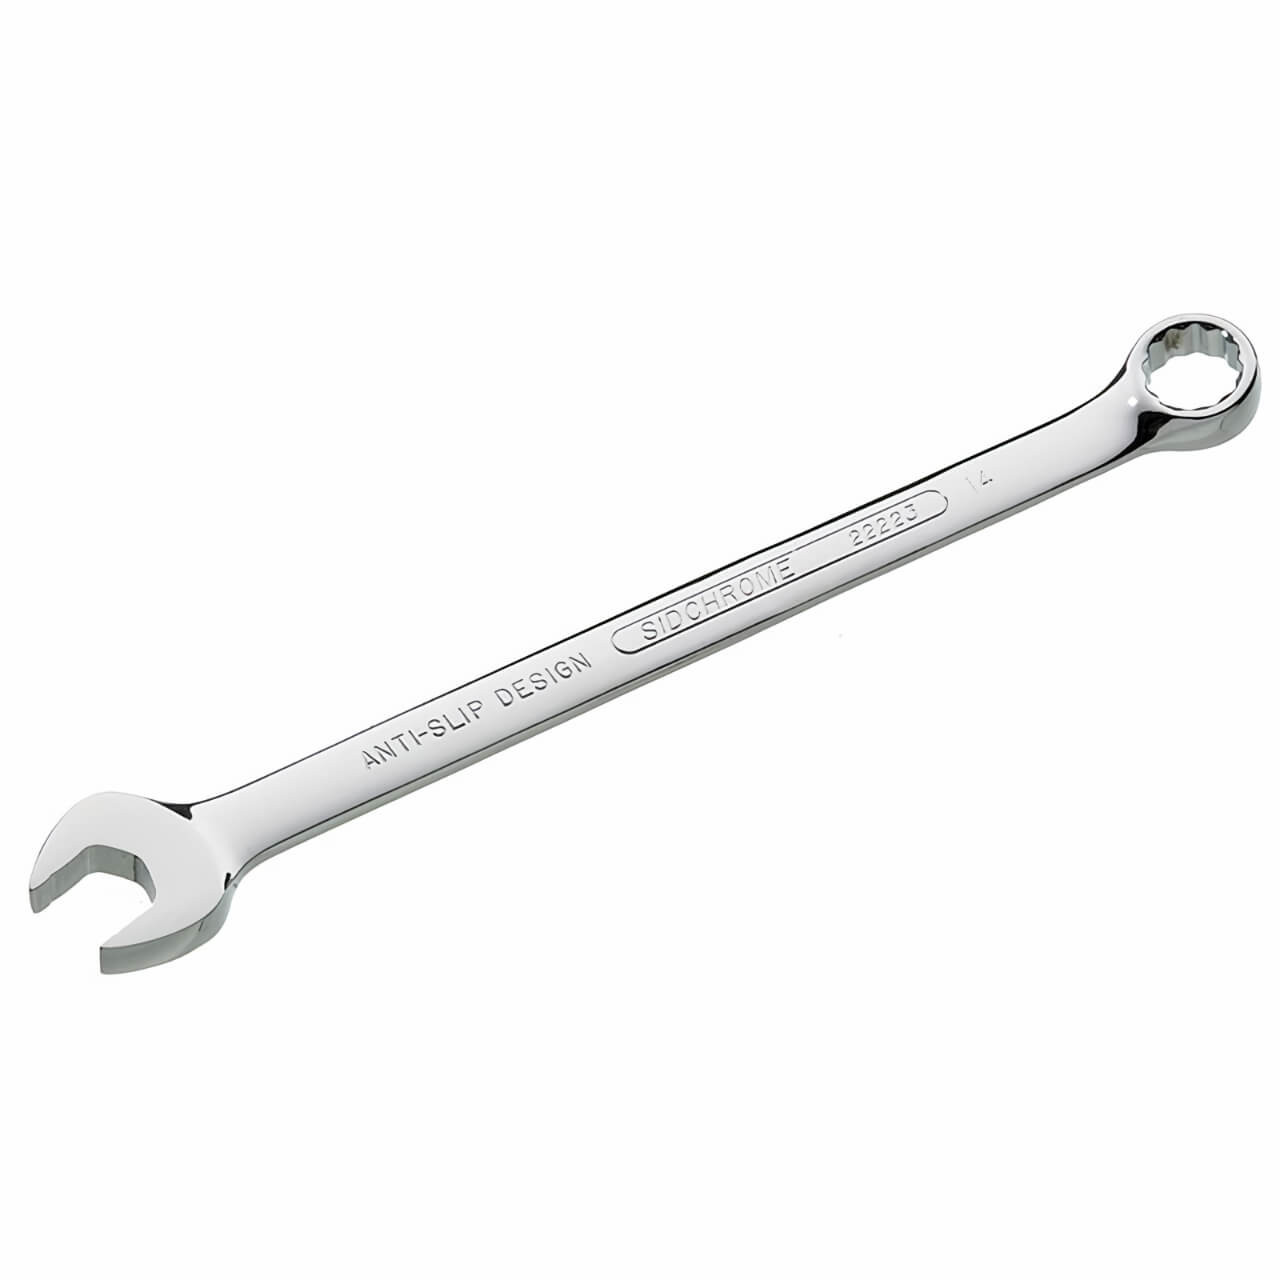 Sidchrome 14mm Combination ROE Spanner Metric